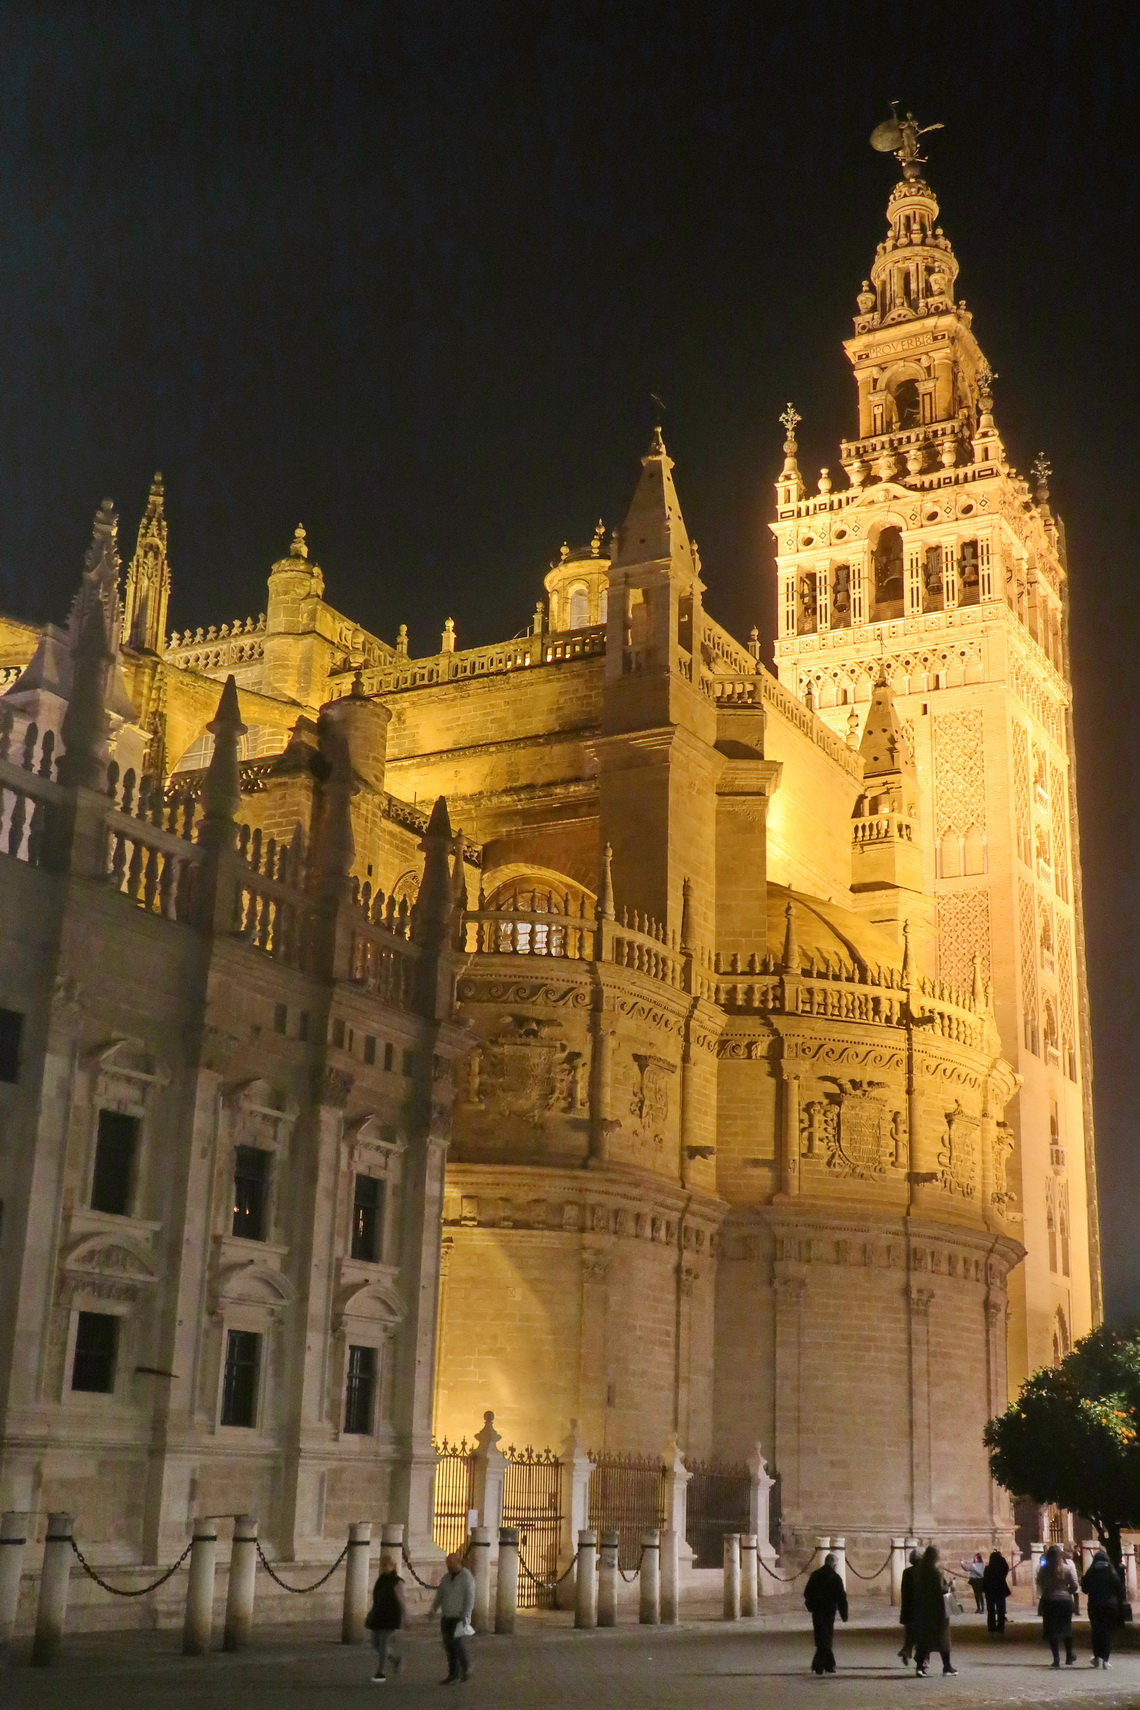 The cathedral of Seville at night